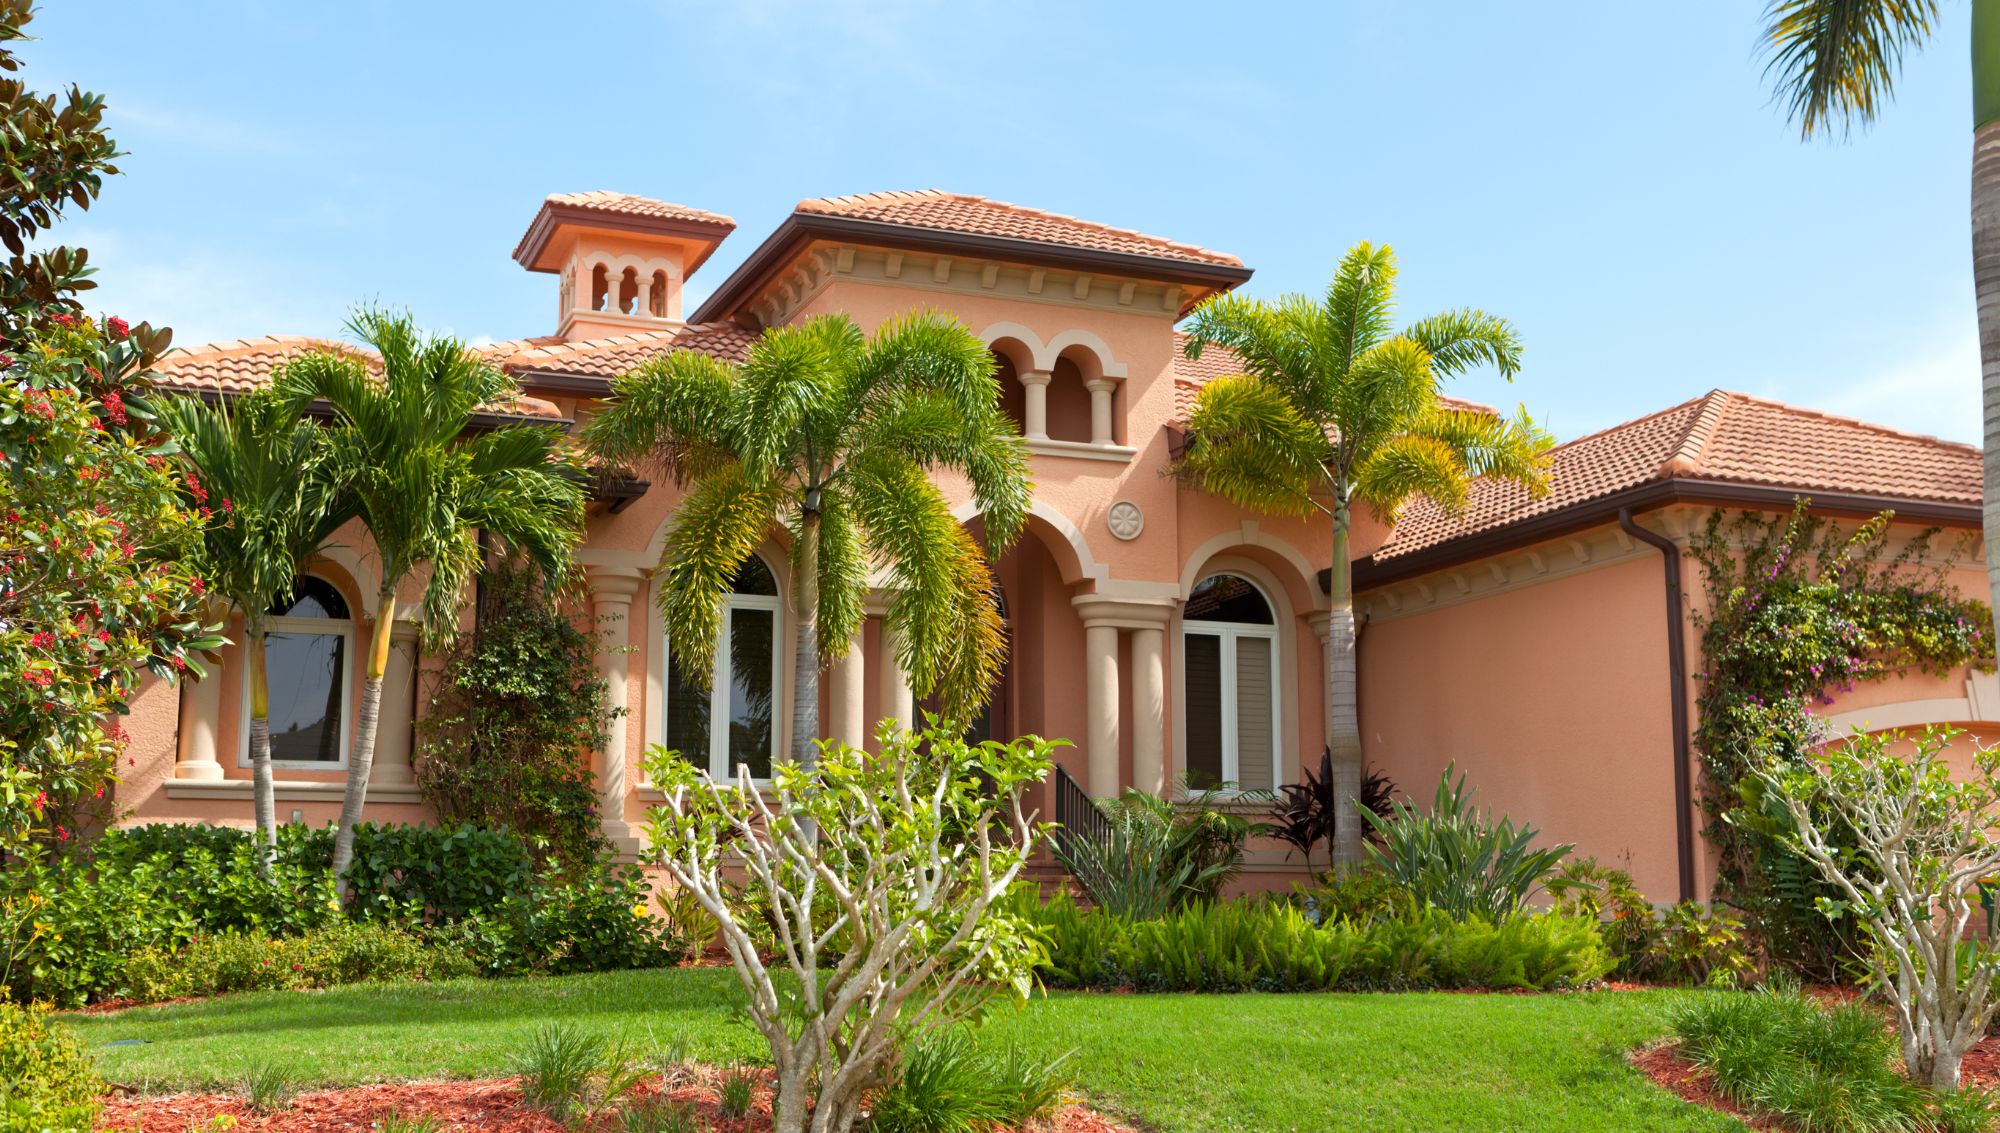 Beautiful Home in Florida with Excellent Landscaping